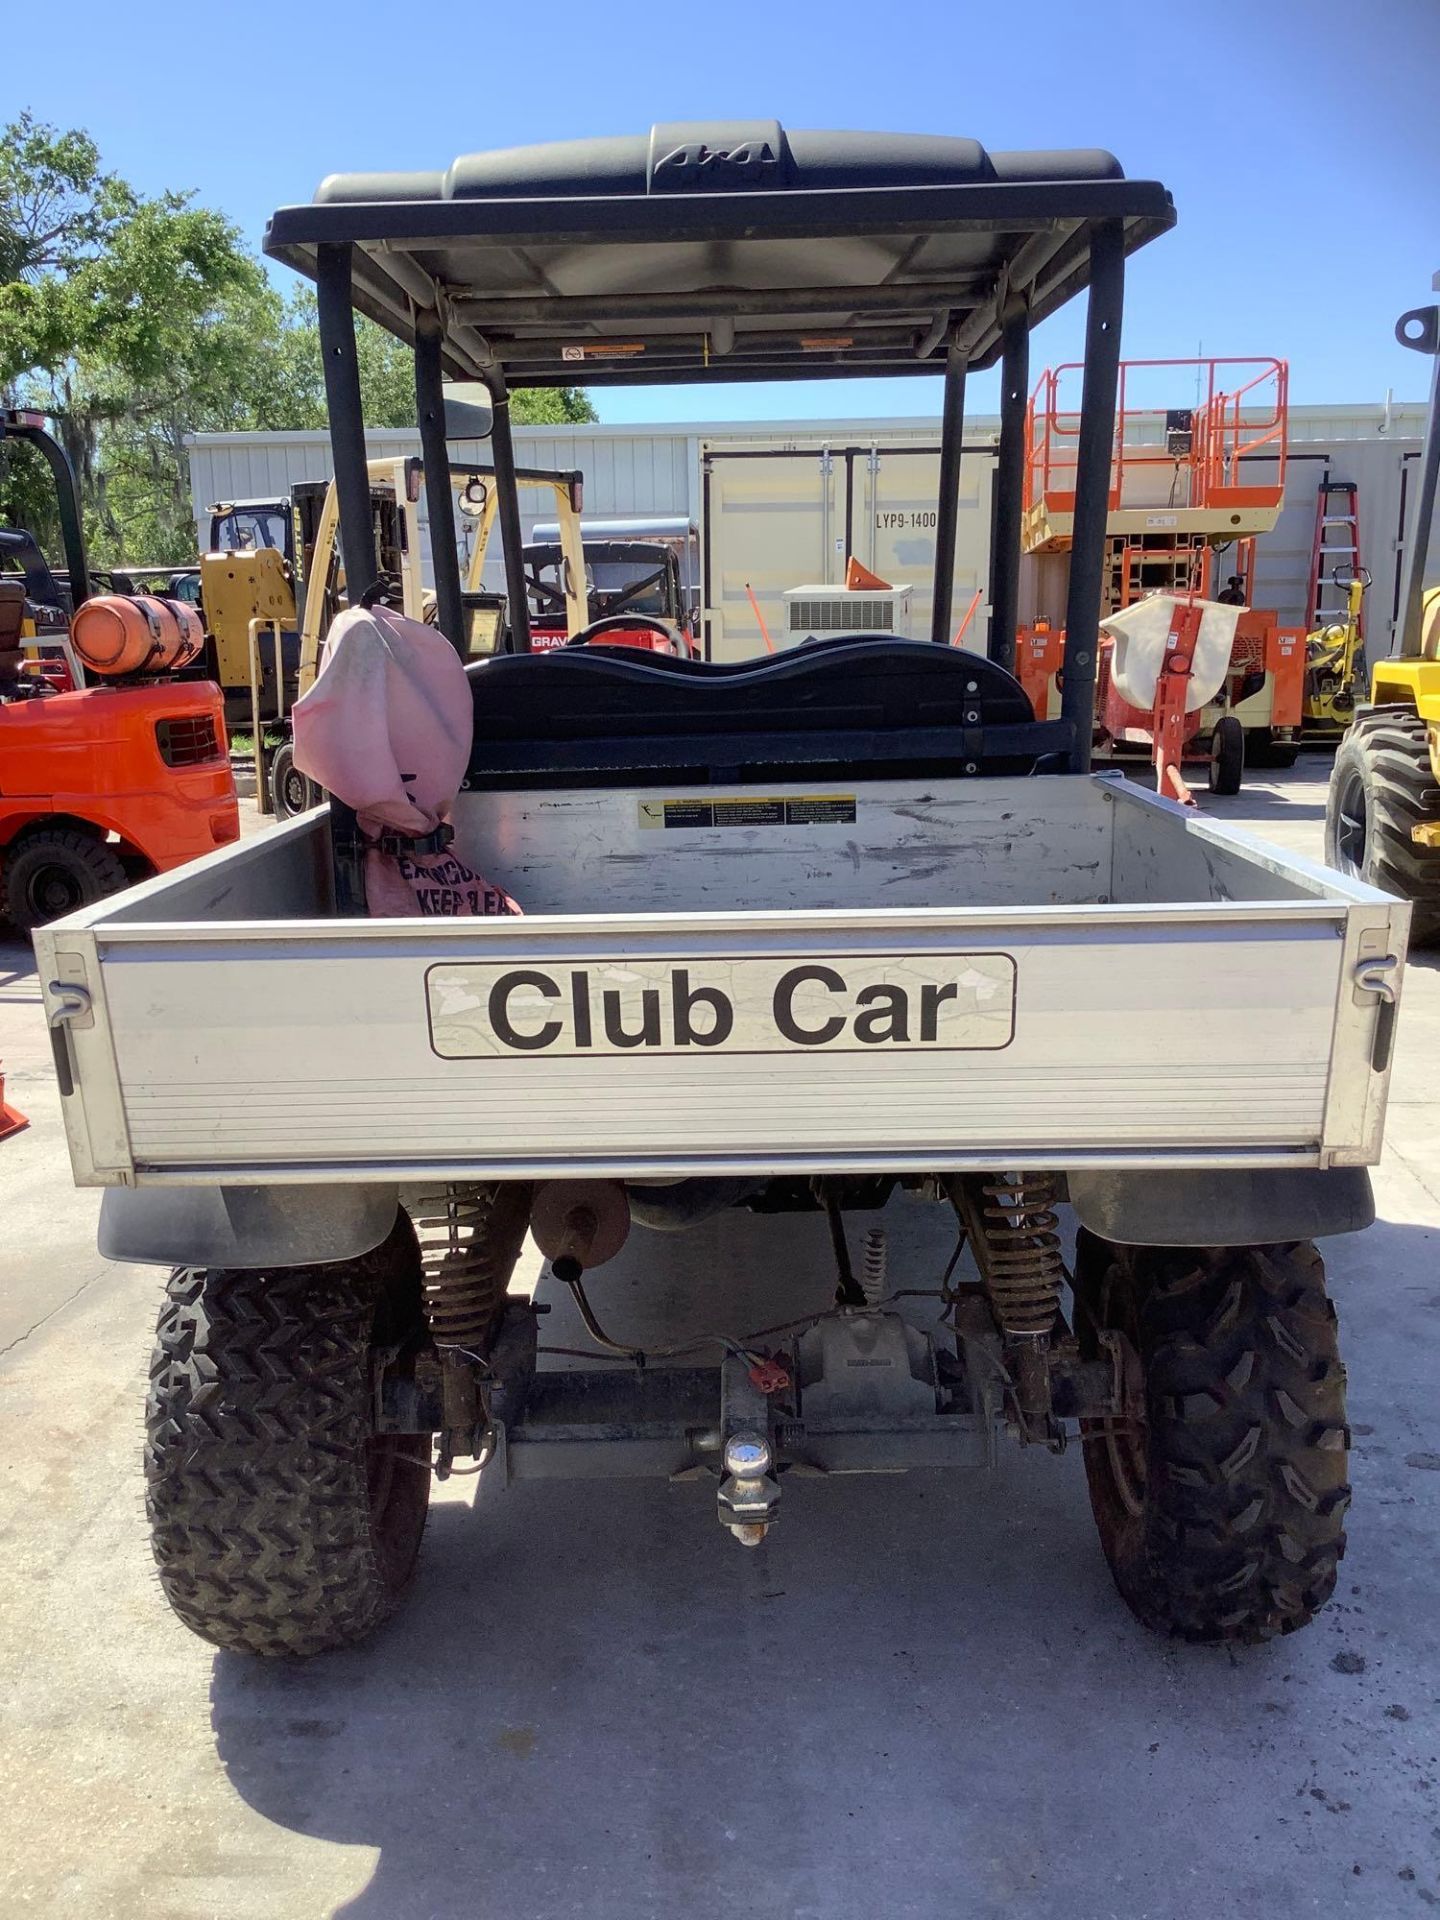 CLUB CAR CARYALL 295SE 4x4 INTELLITRAK GOLF CART, GAS POWERED , MANUAL DUMP BED, HITCH IN FRONT & BA - Image 7 of 19